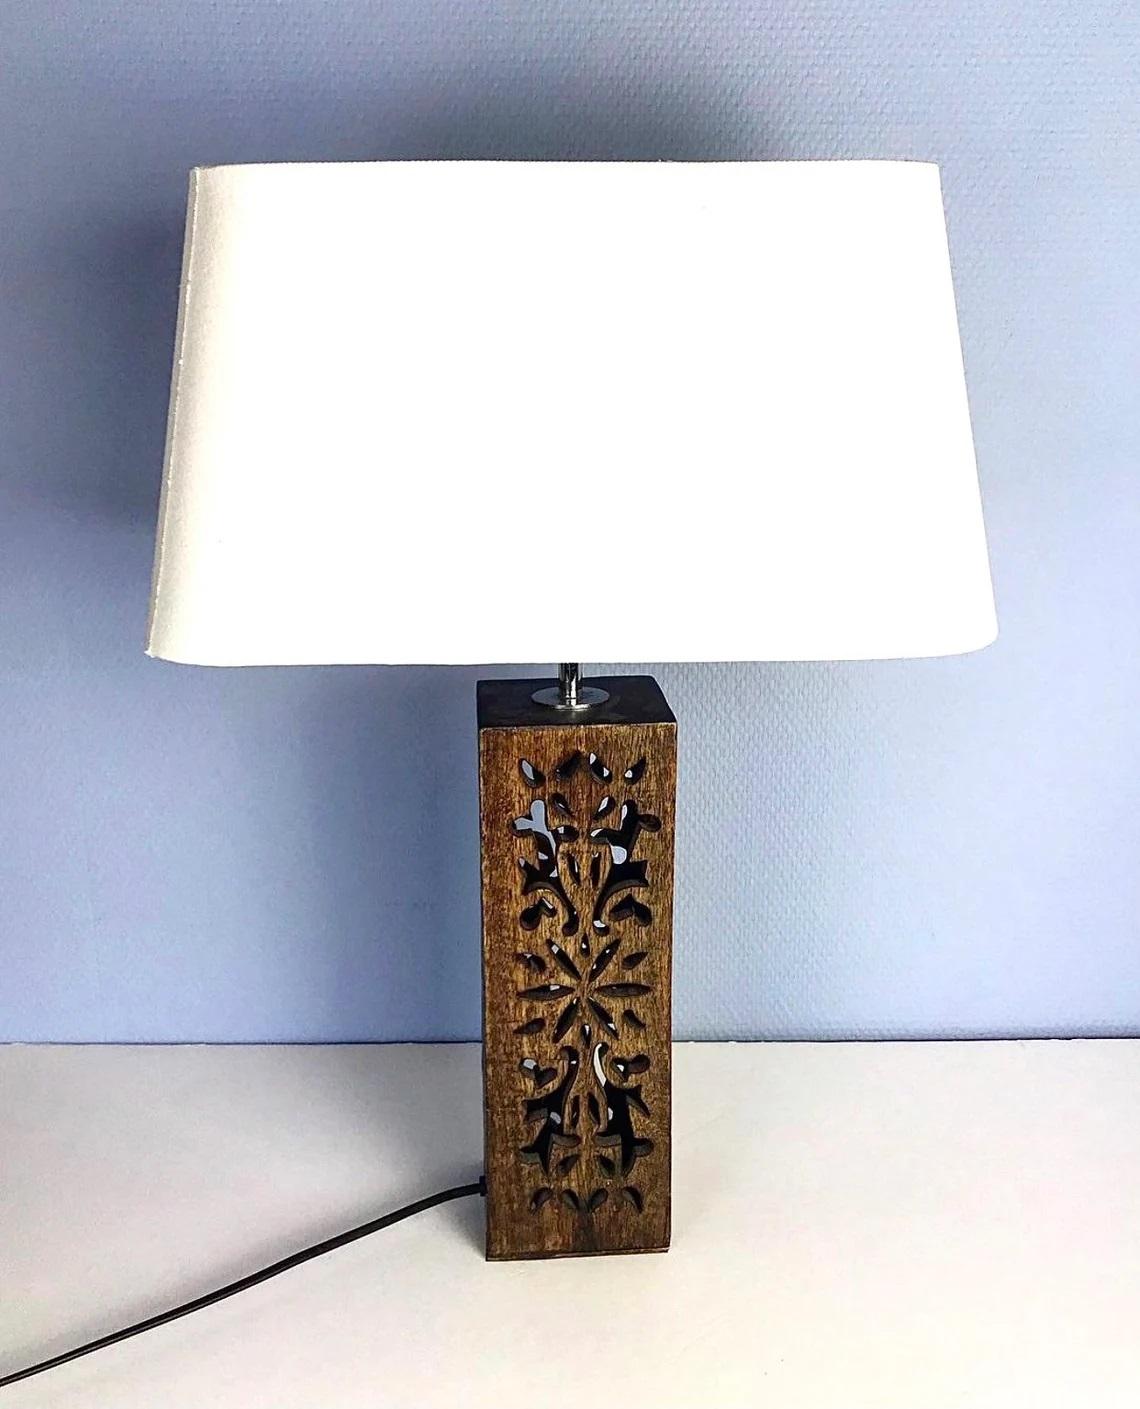 - Rustic wooden table lamp with shade
- Made in France
- Circa 2000s

Size:
Height - 22.4 inch (57 cm)
Width - 17.3 inch (44 cm)
Depth - 11 inch (28 cm).